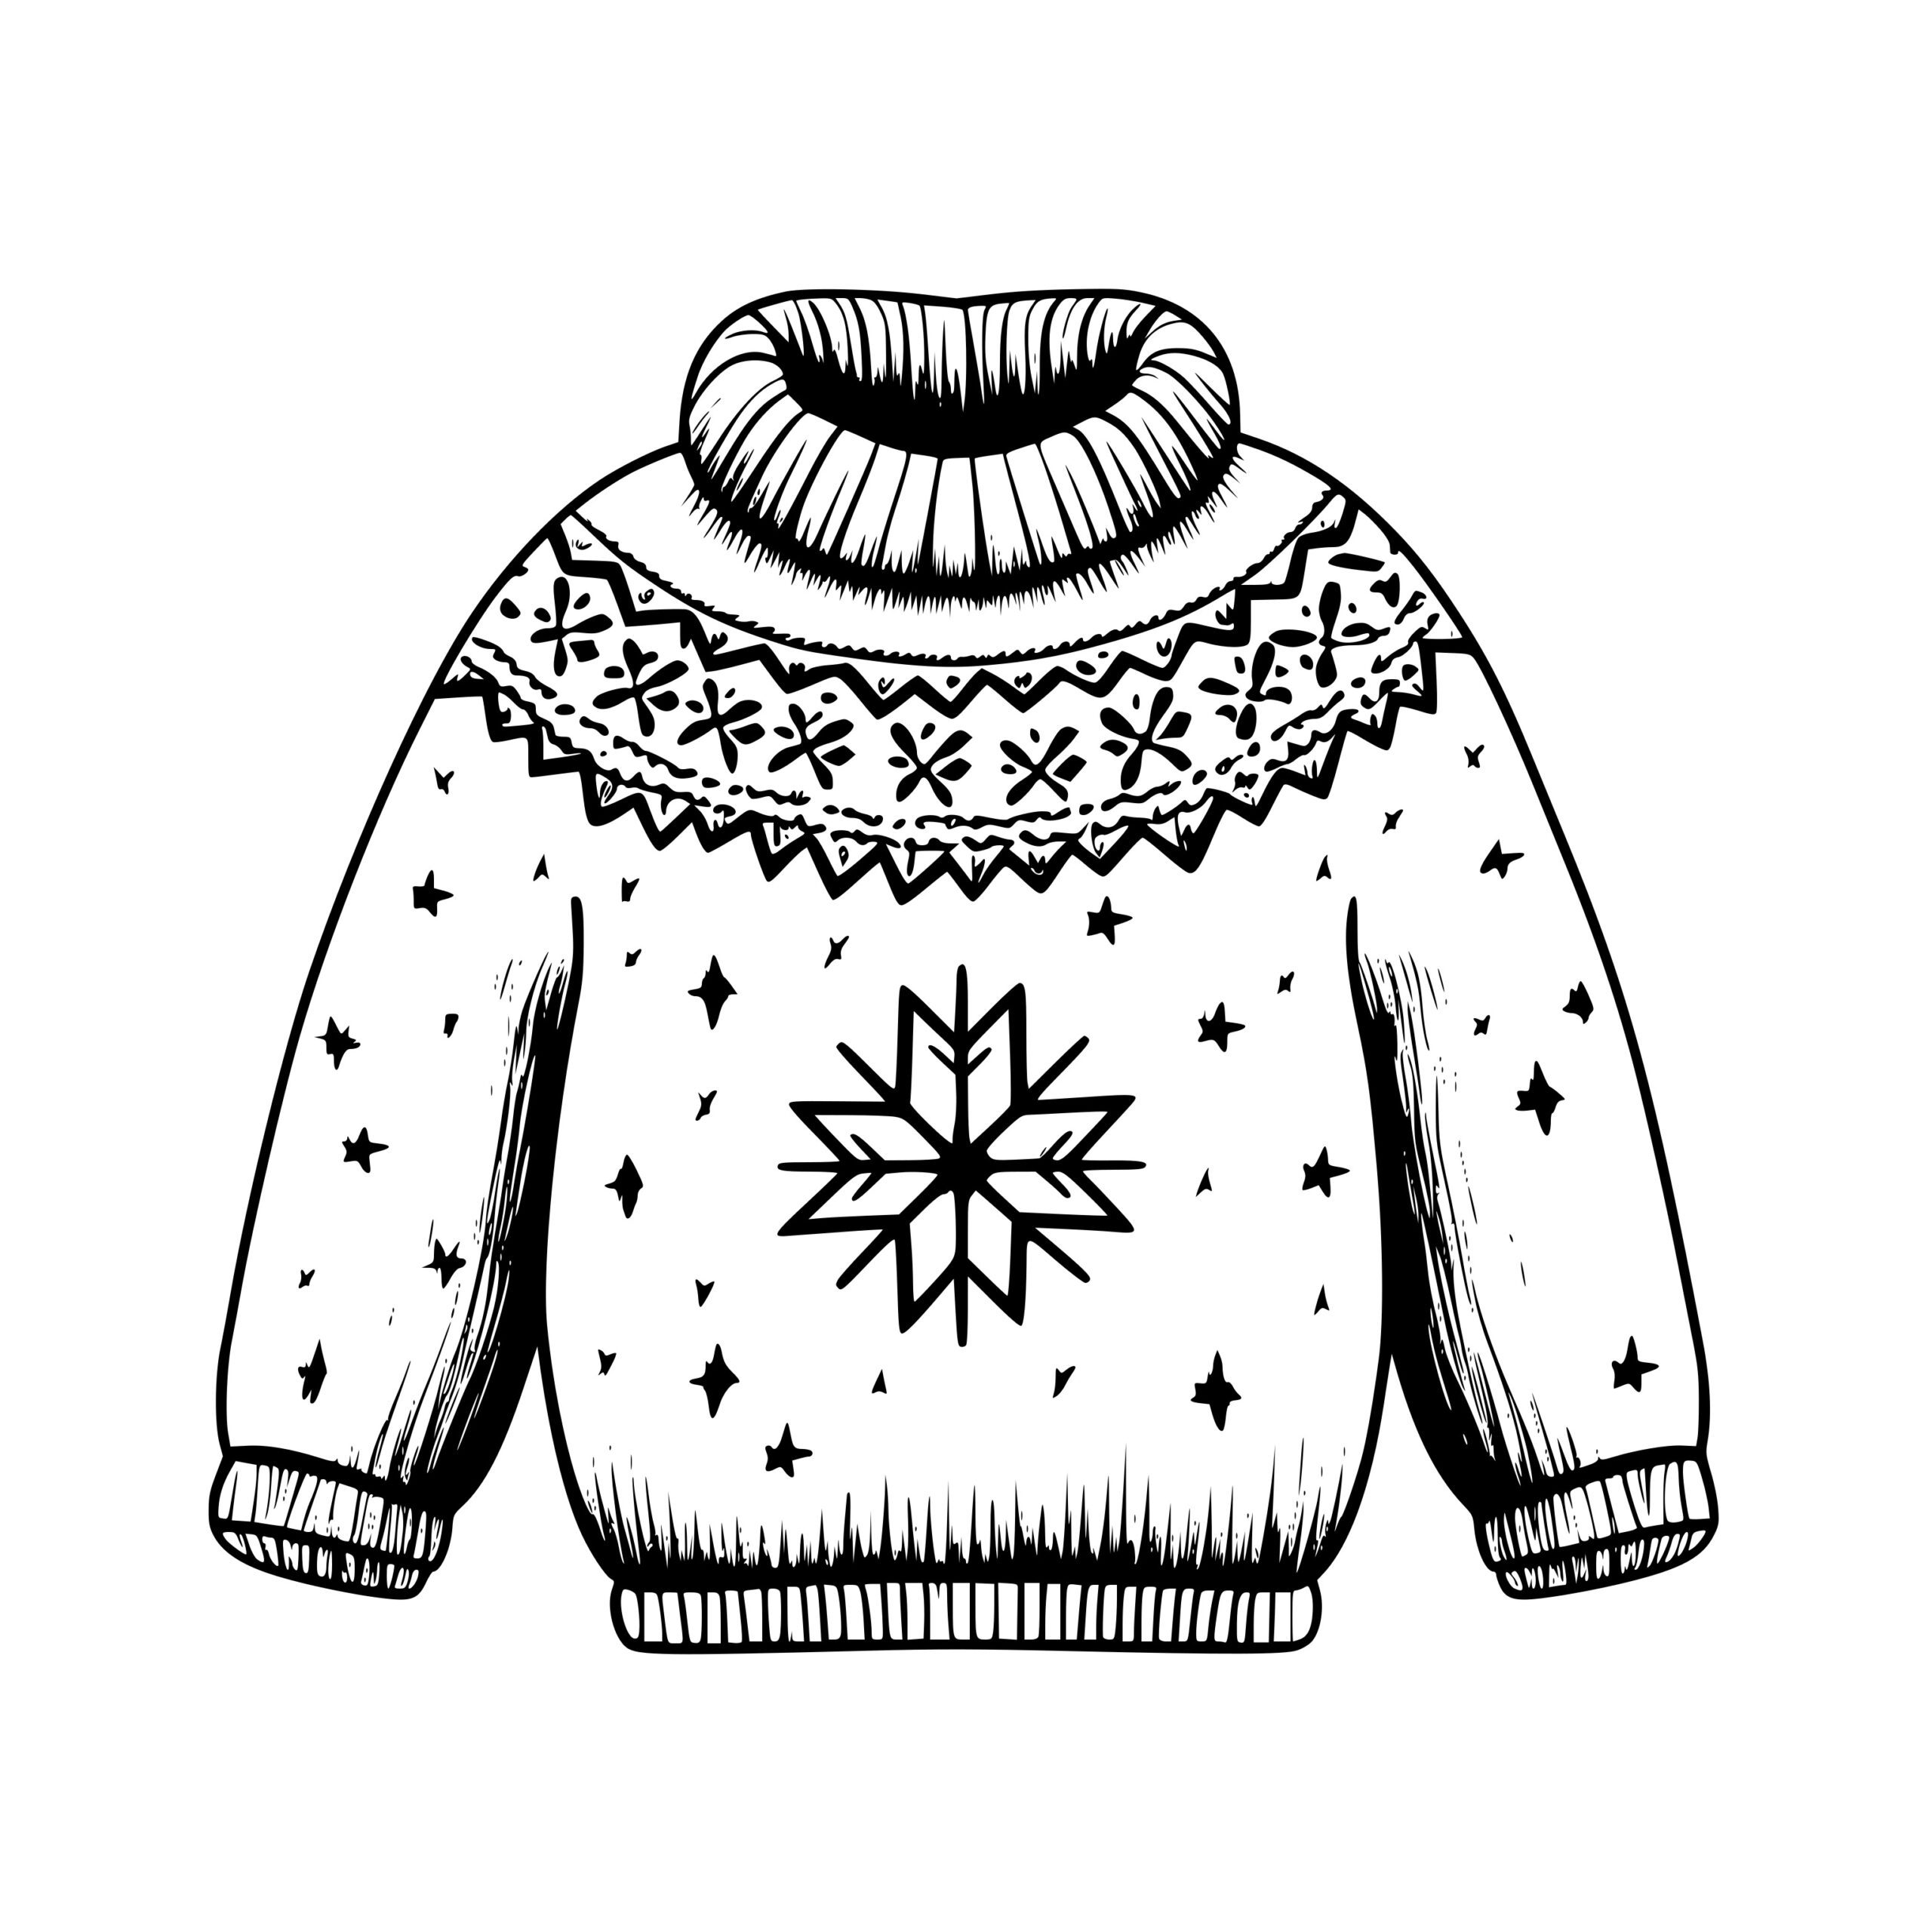 Cozy Sweater SVG Image for Cricut, Silhouette, Laser Machines